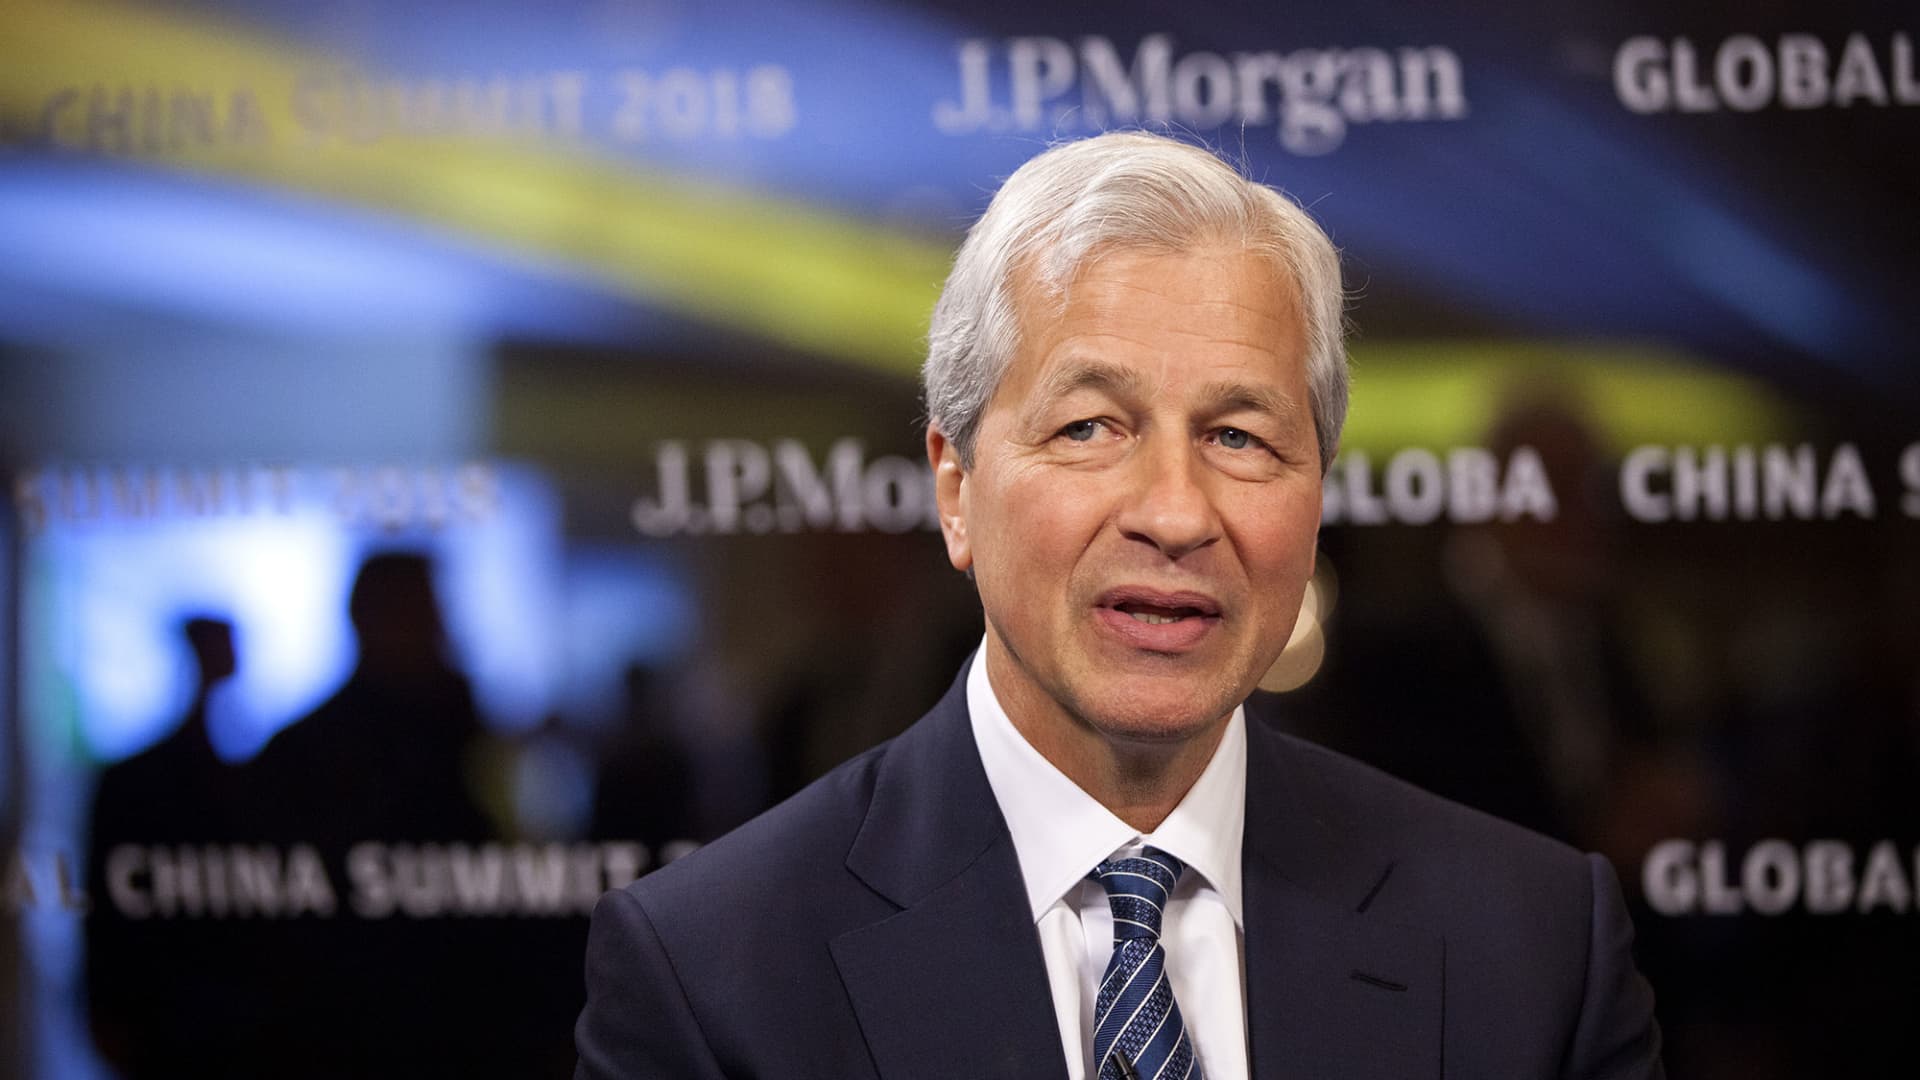 JPMorgan CEO Jamie Dimon on what makes the most successful leaders